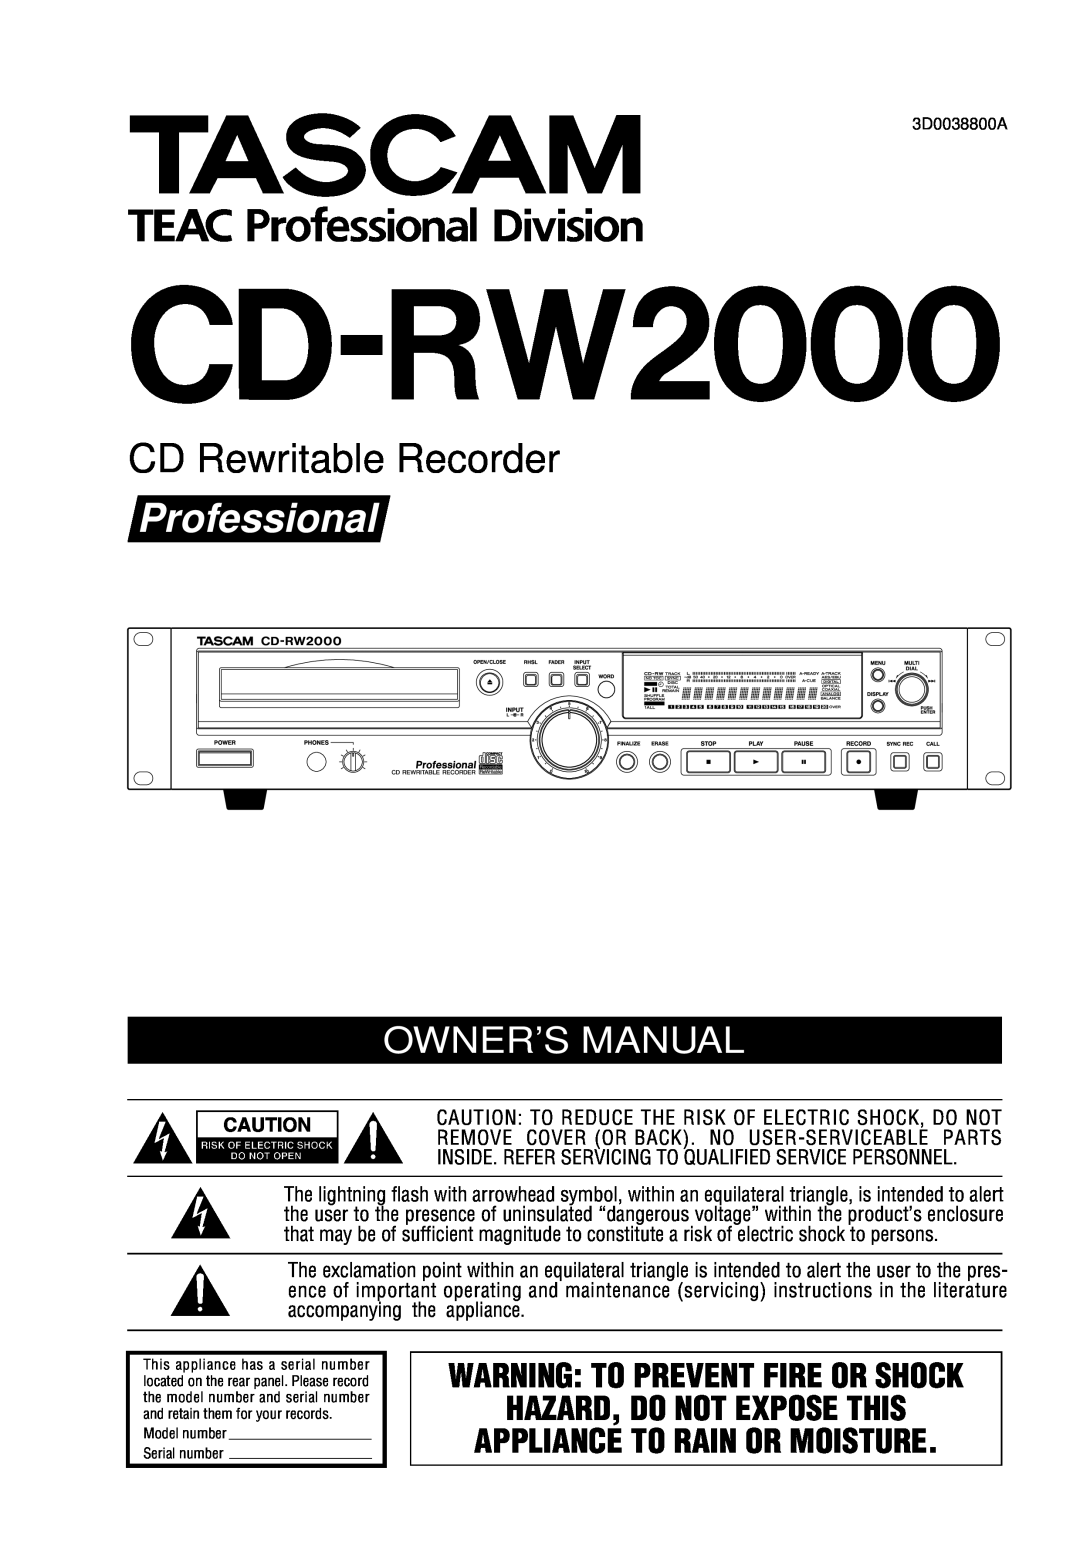 Tascam CD-RW2000 owner manual CD Rewritable Recorder, Professional, Hazard, Do Not Expose This, Model number Serial number 